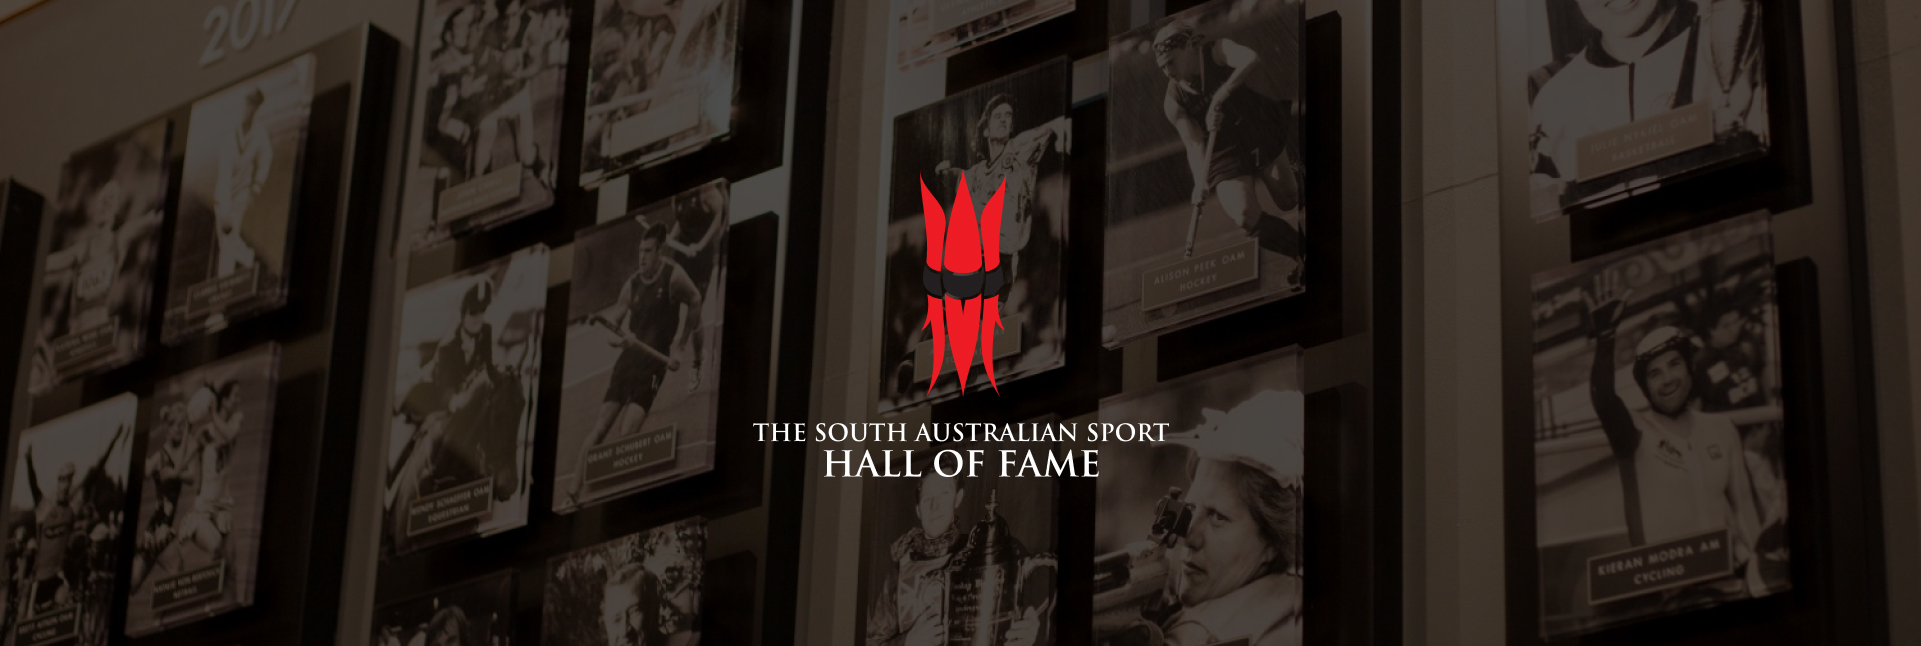 The South Australian Sport Hall of Fame